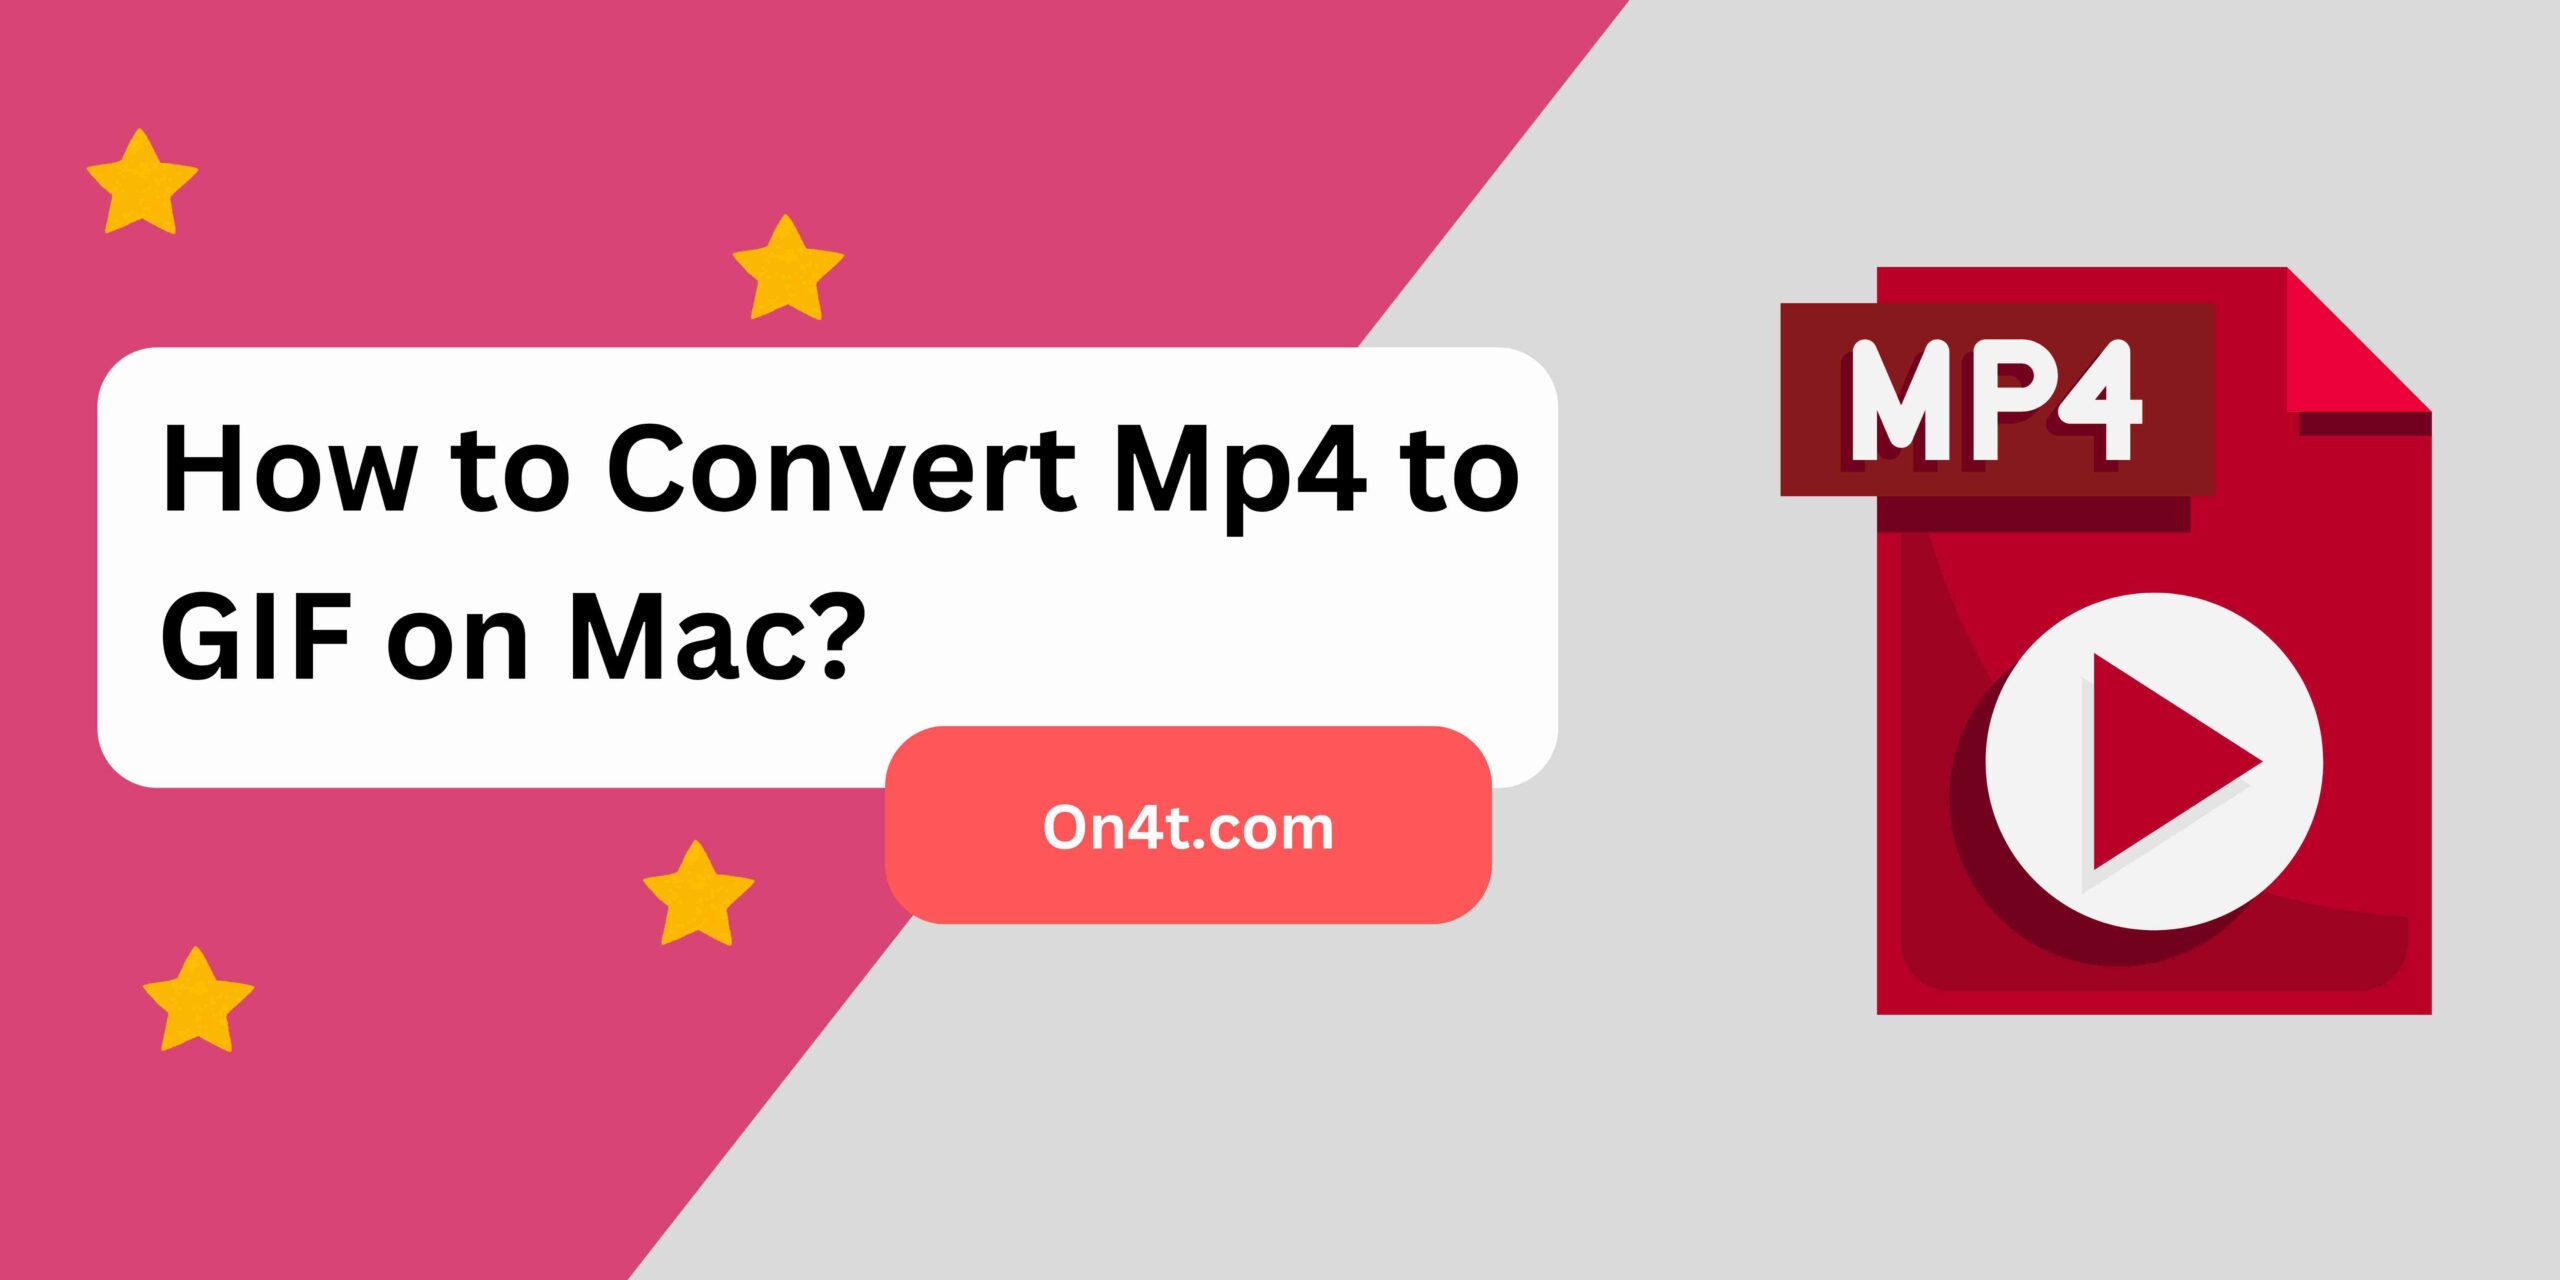 How to Convert Mp4 to GIF on Mac